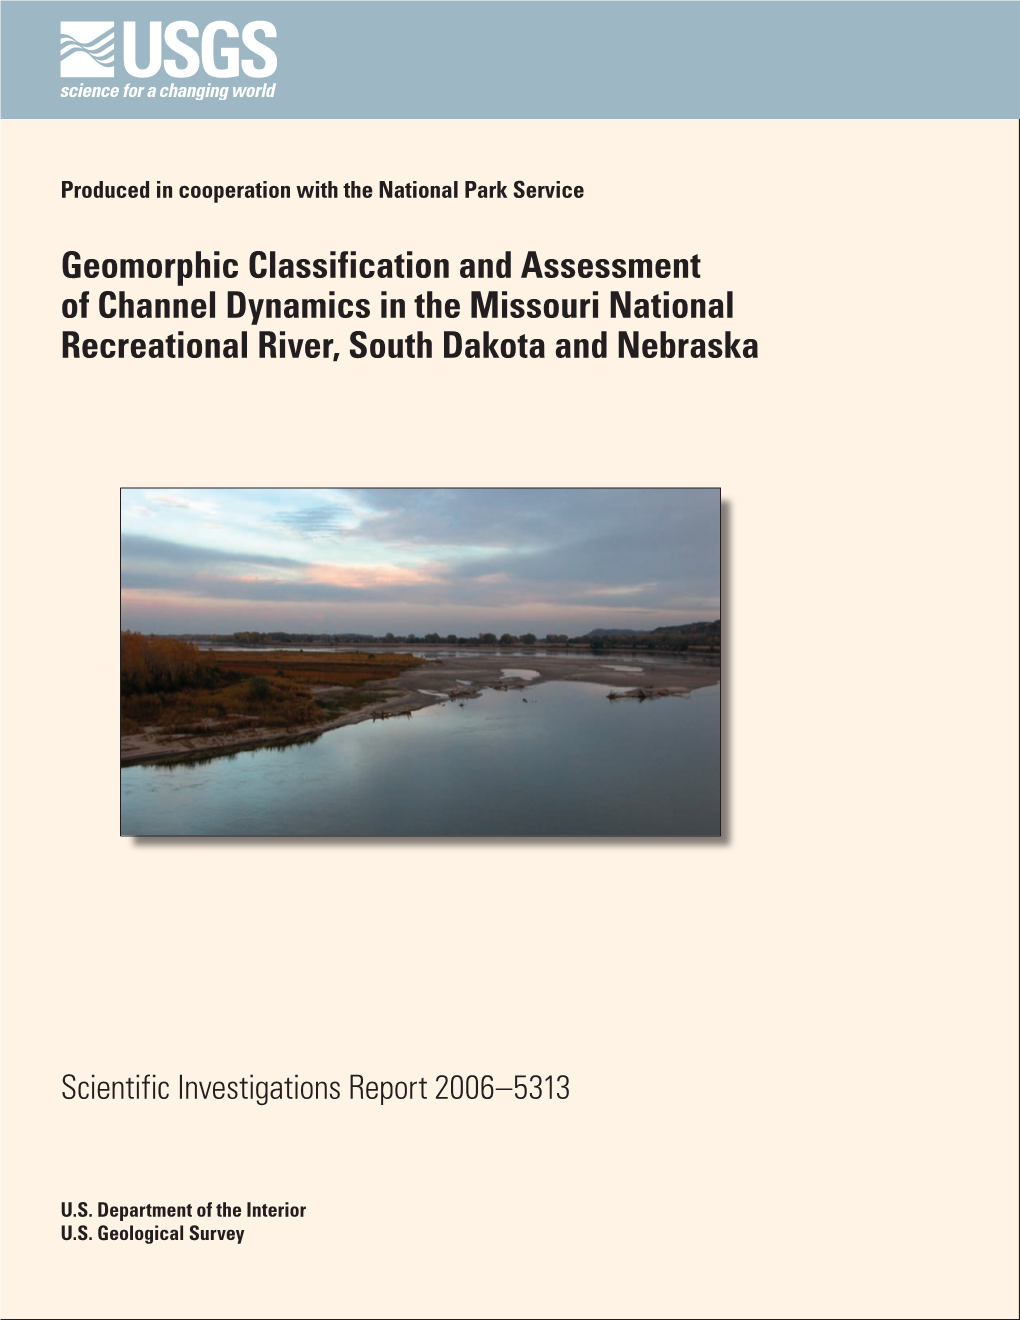 Geomorphic Classification and Assessment of Channel Dynamics in the Missouri National Recreational River, South Dakota and Nebraska